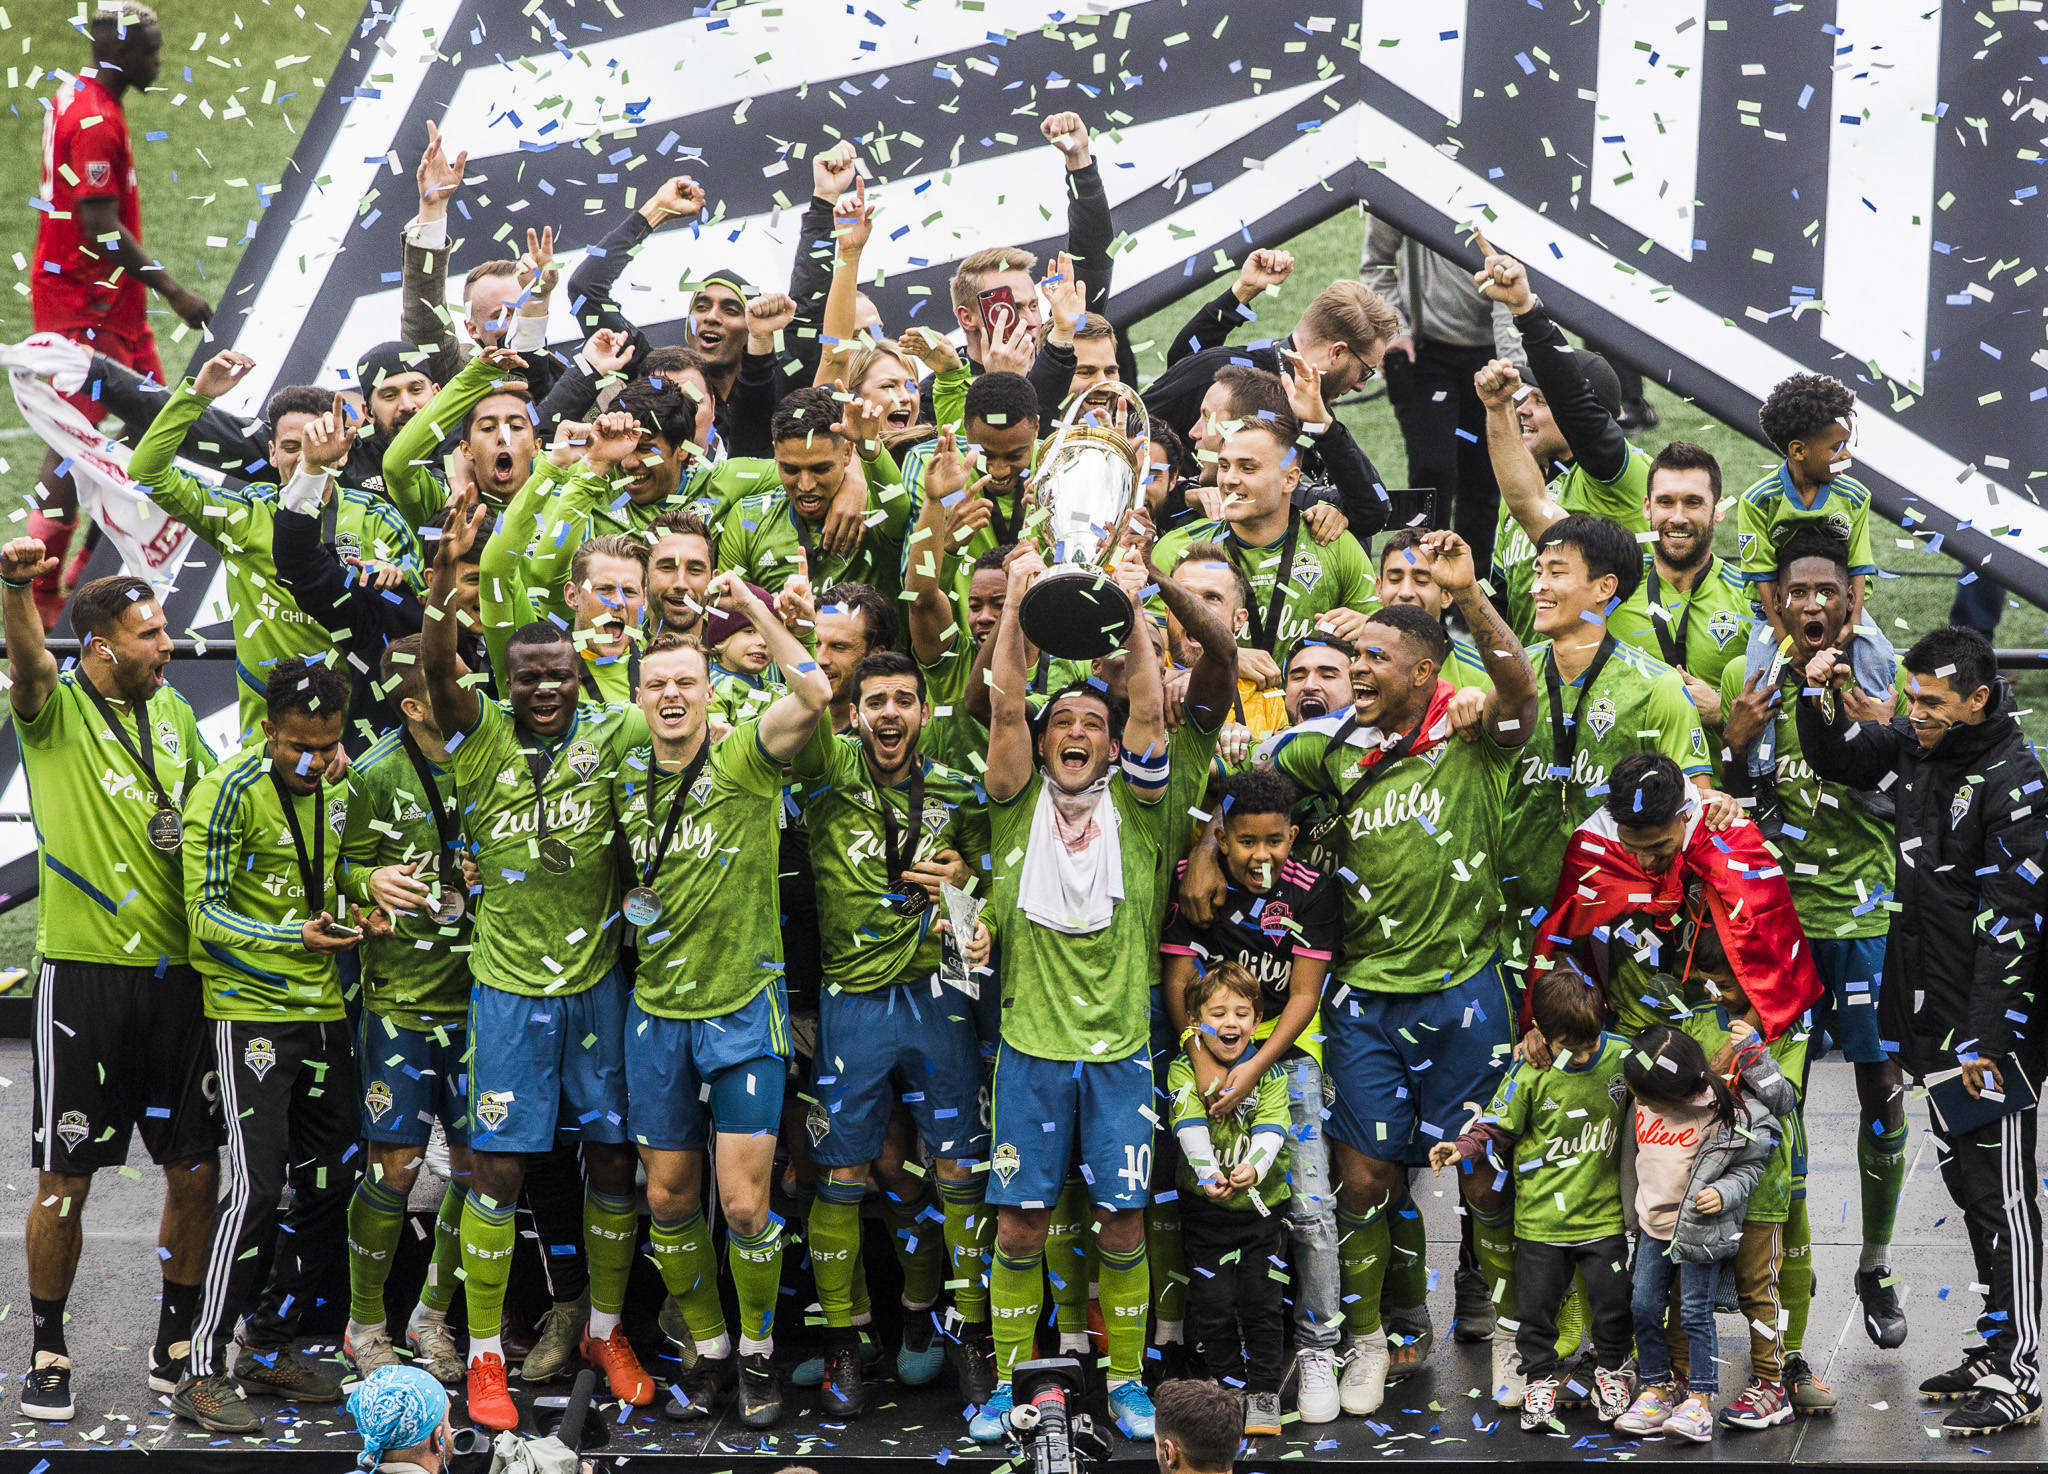 The Seattle Sounders lift the MLS Cup into the air after beating Toronto F.C. 3-1 to win the MLS Cup on Nov. 10, 2019 in Seattle, Wash. (Olivia Vanni / The Herald)